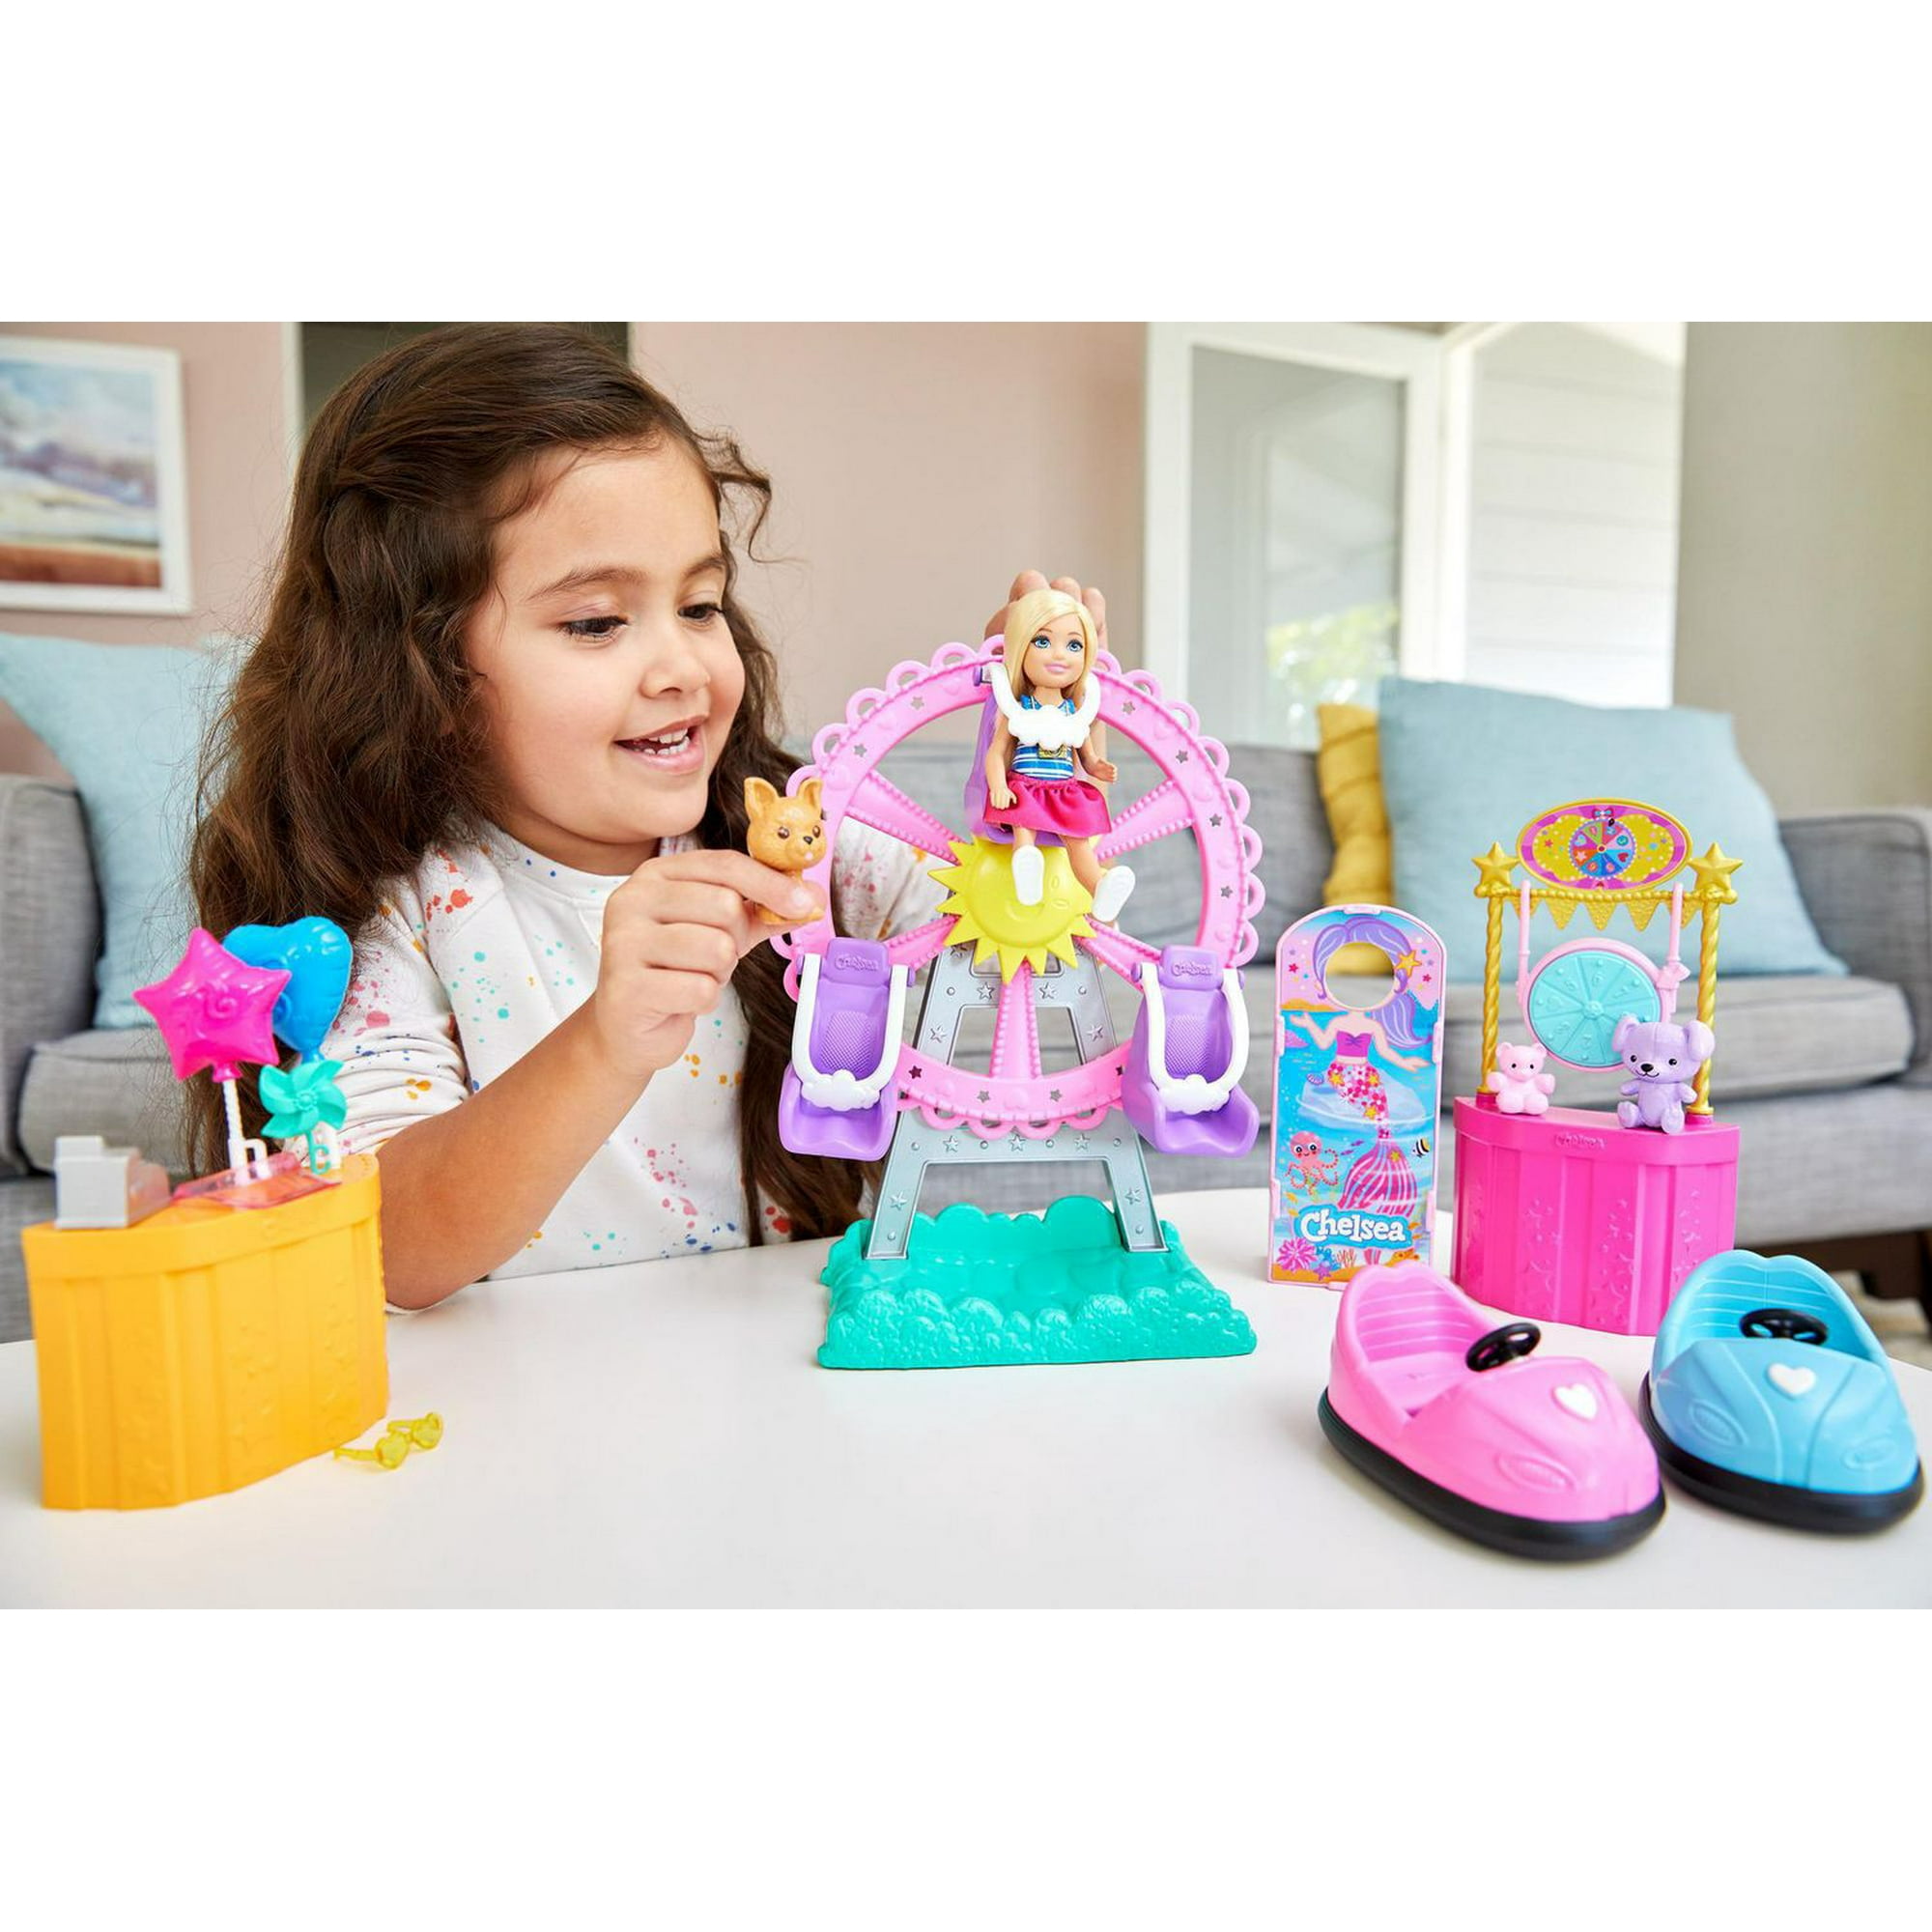 Buy Barbie Club Chelsea Doll And Carnival Playset Online at Best Price in  India